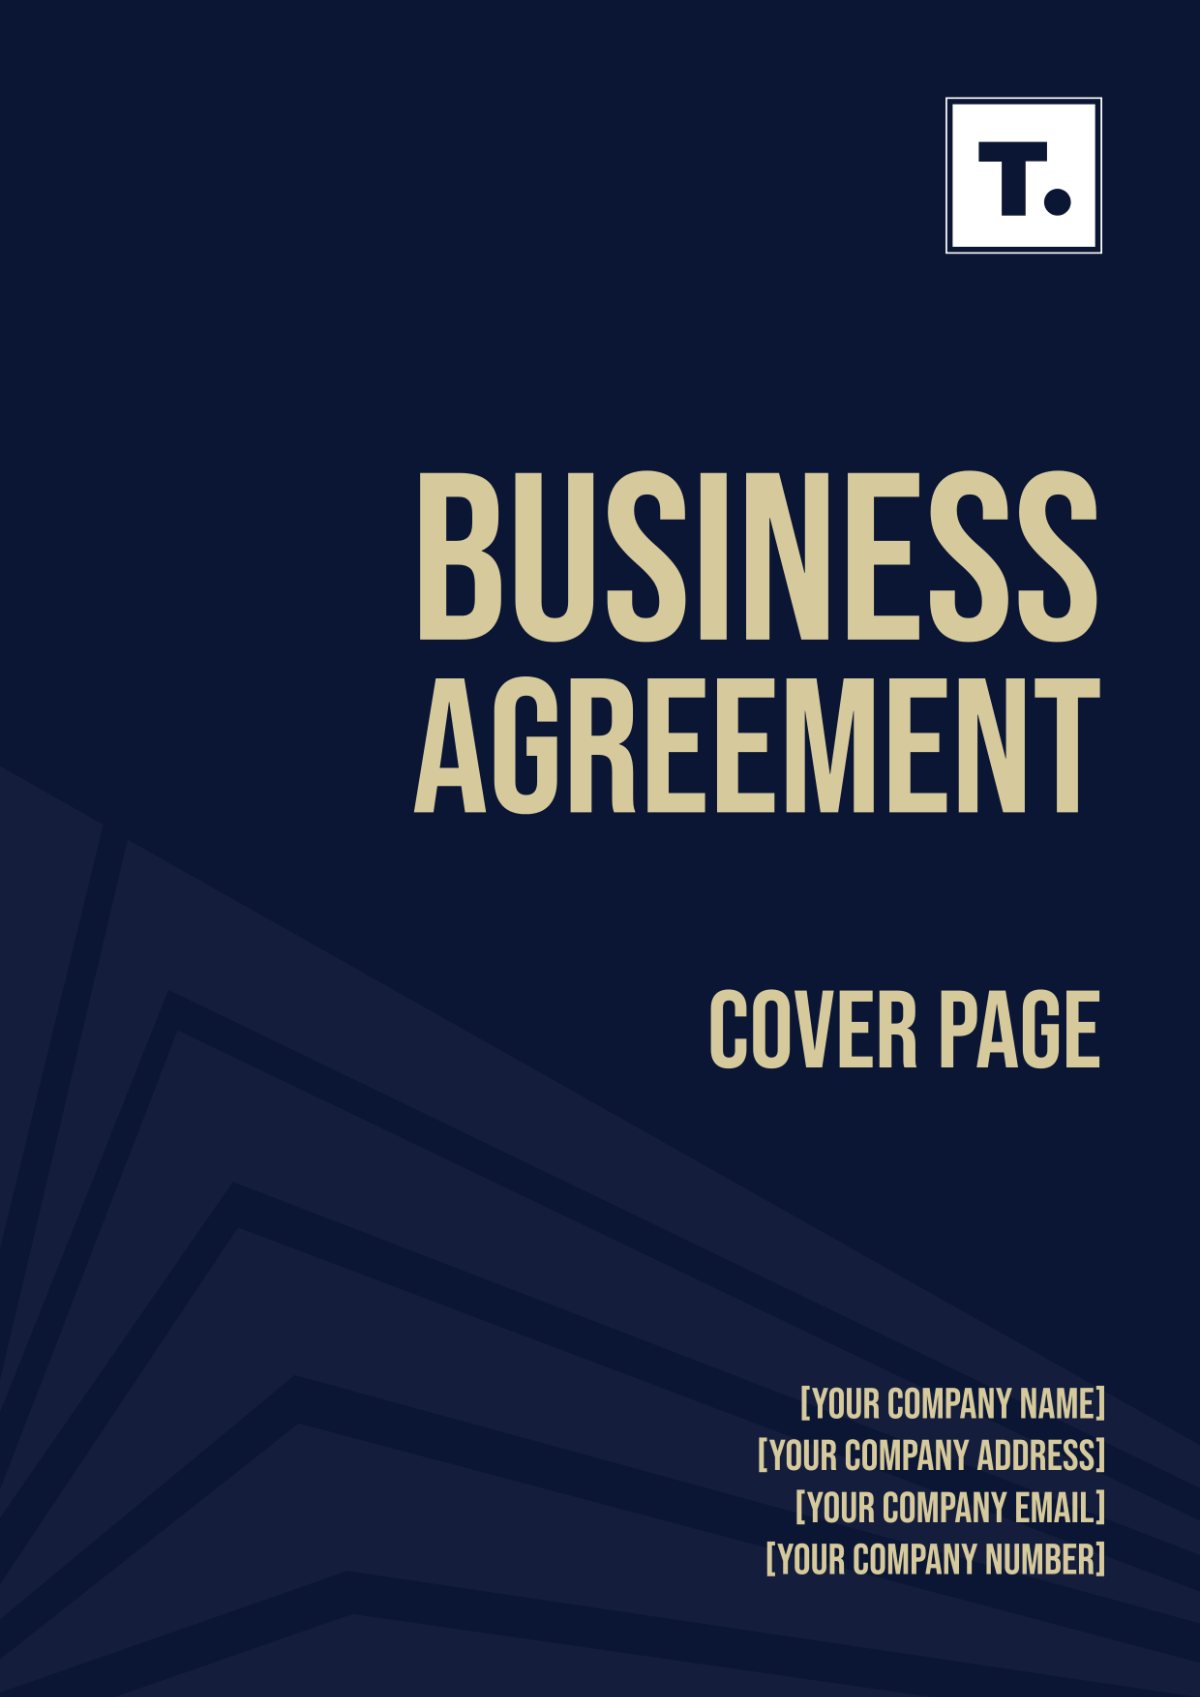 Business Agreement Cover Page